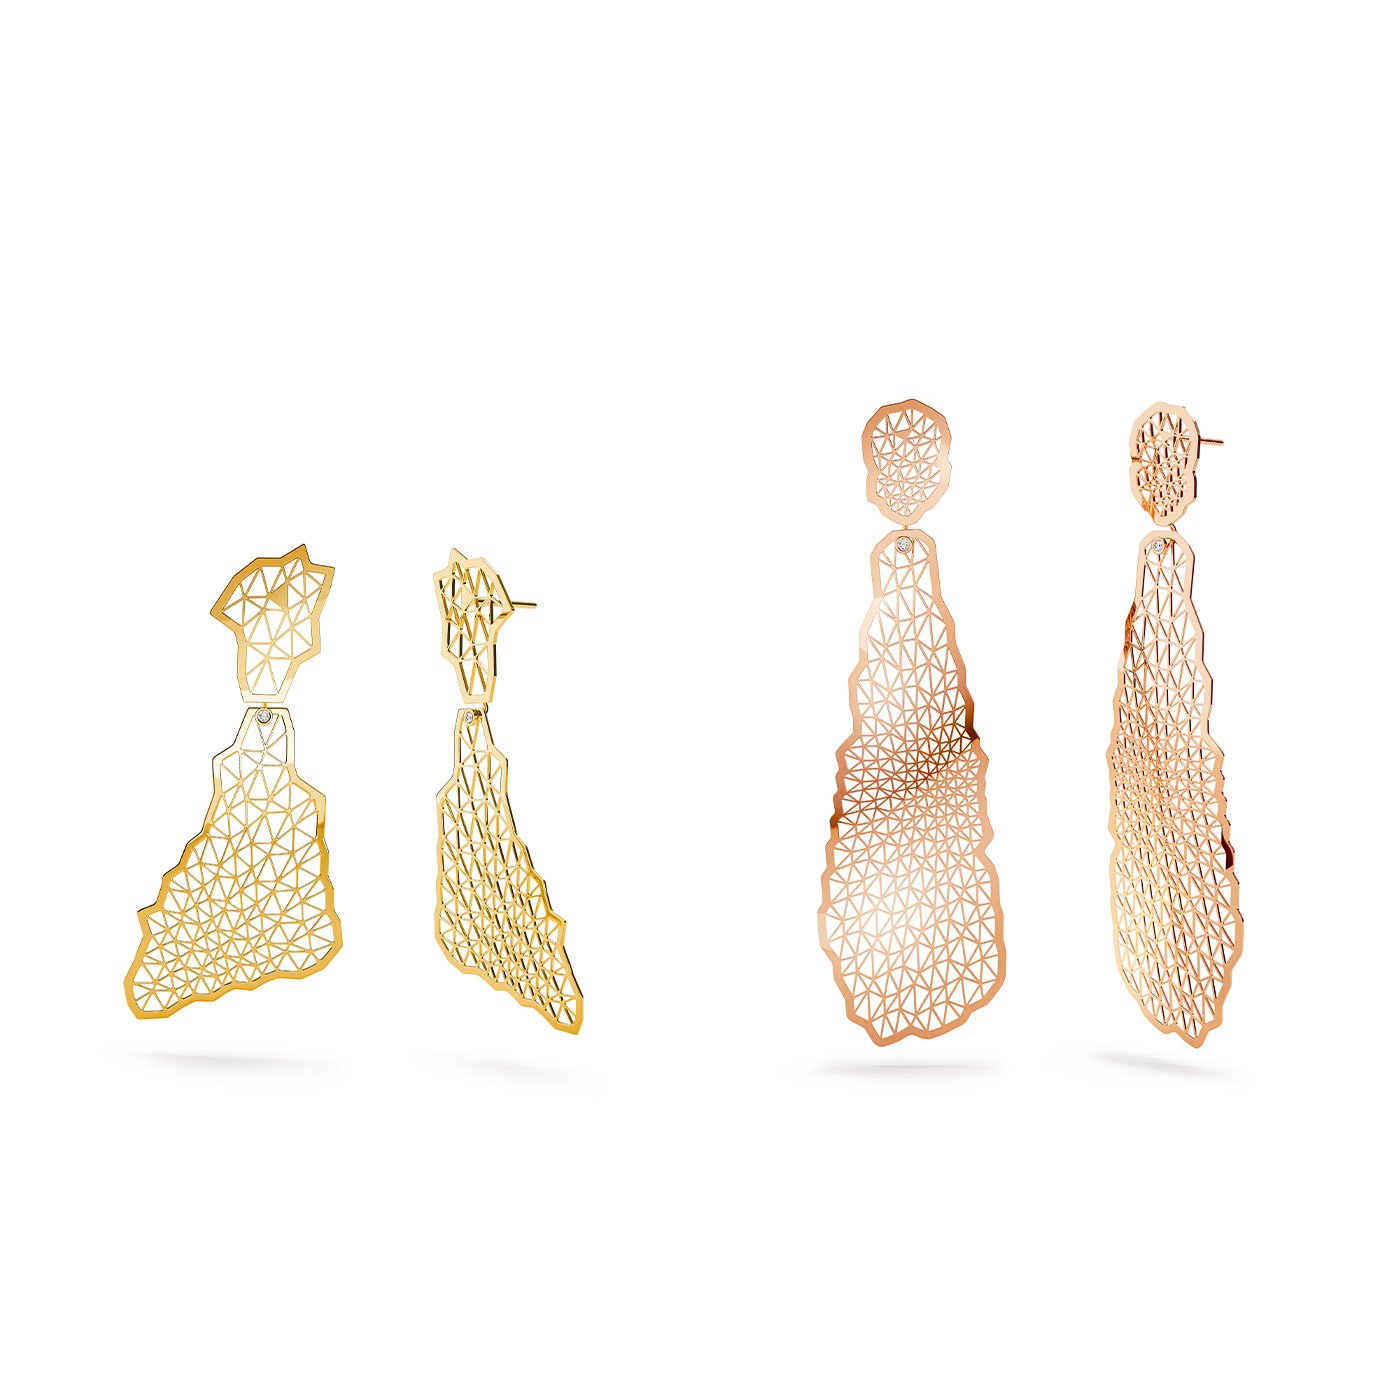 Niessing Topia Vision Triangle earrings